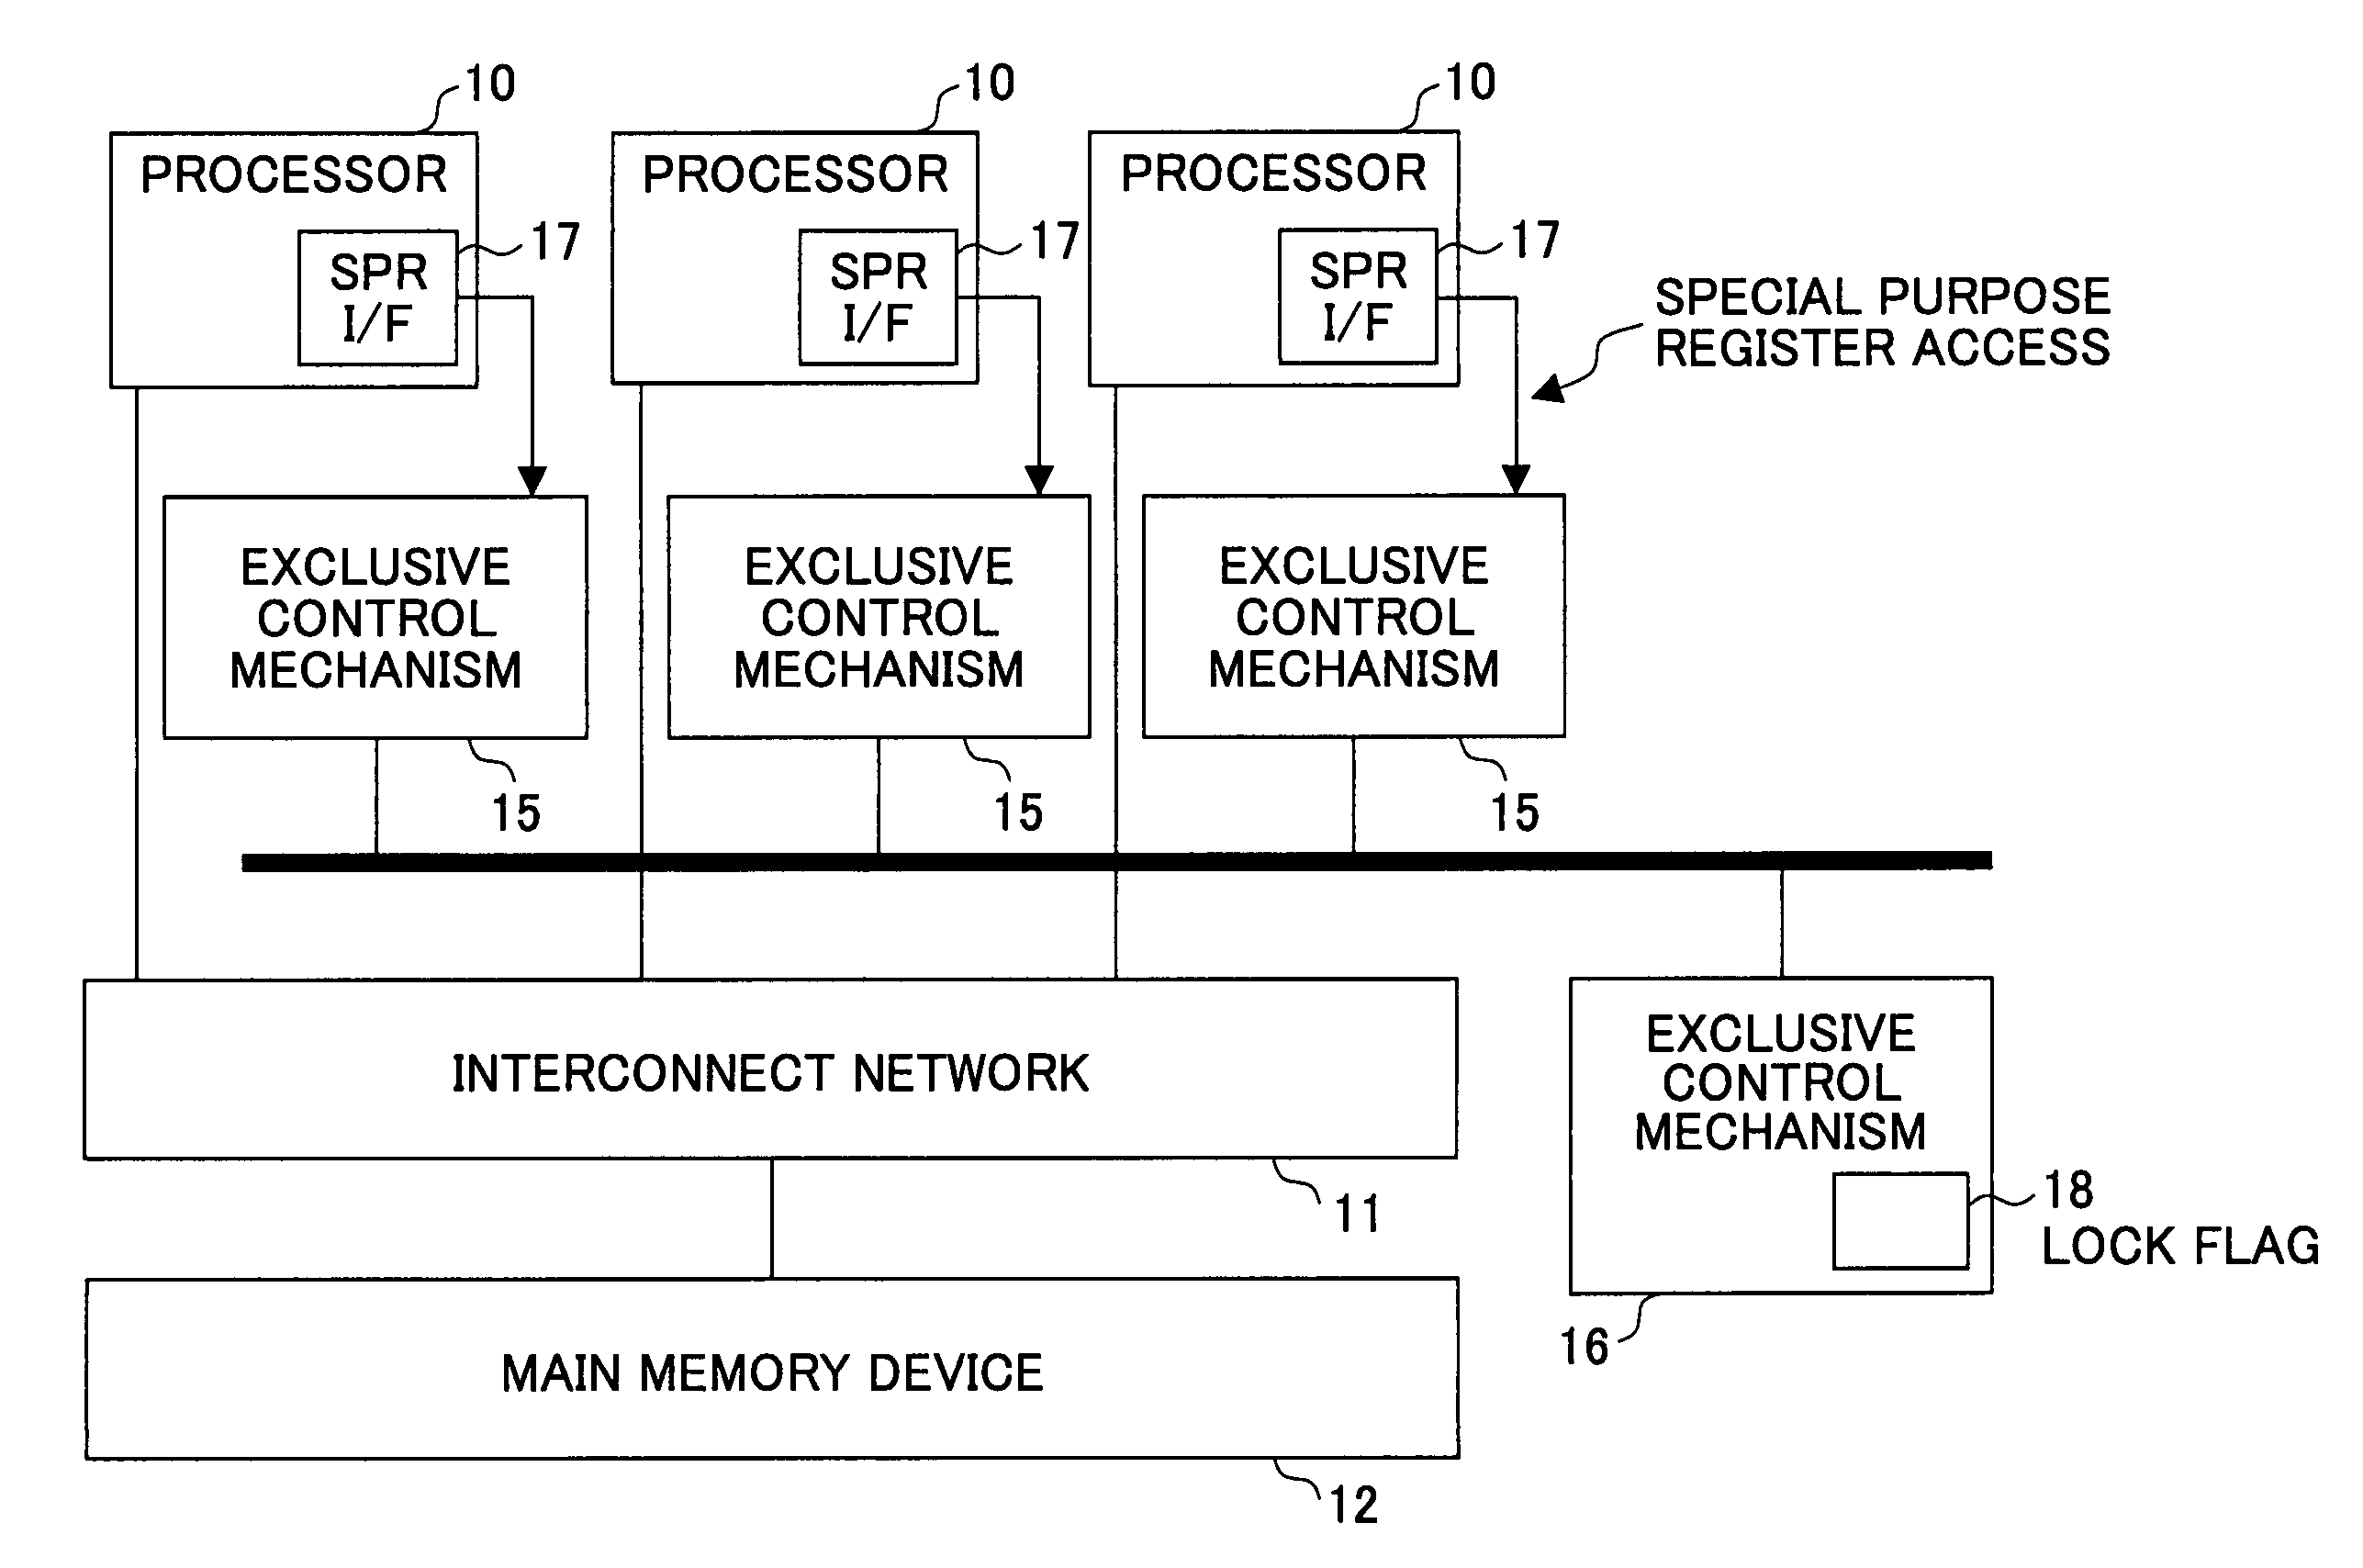 Multiprocessor system with high-speed exclusive control